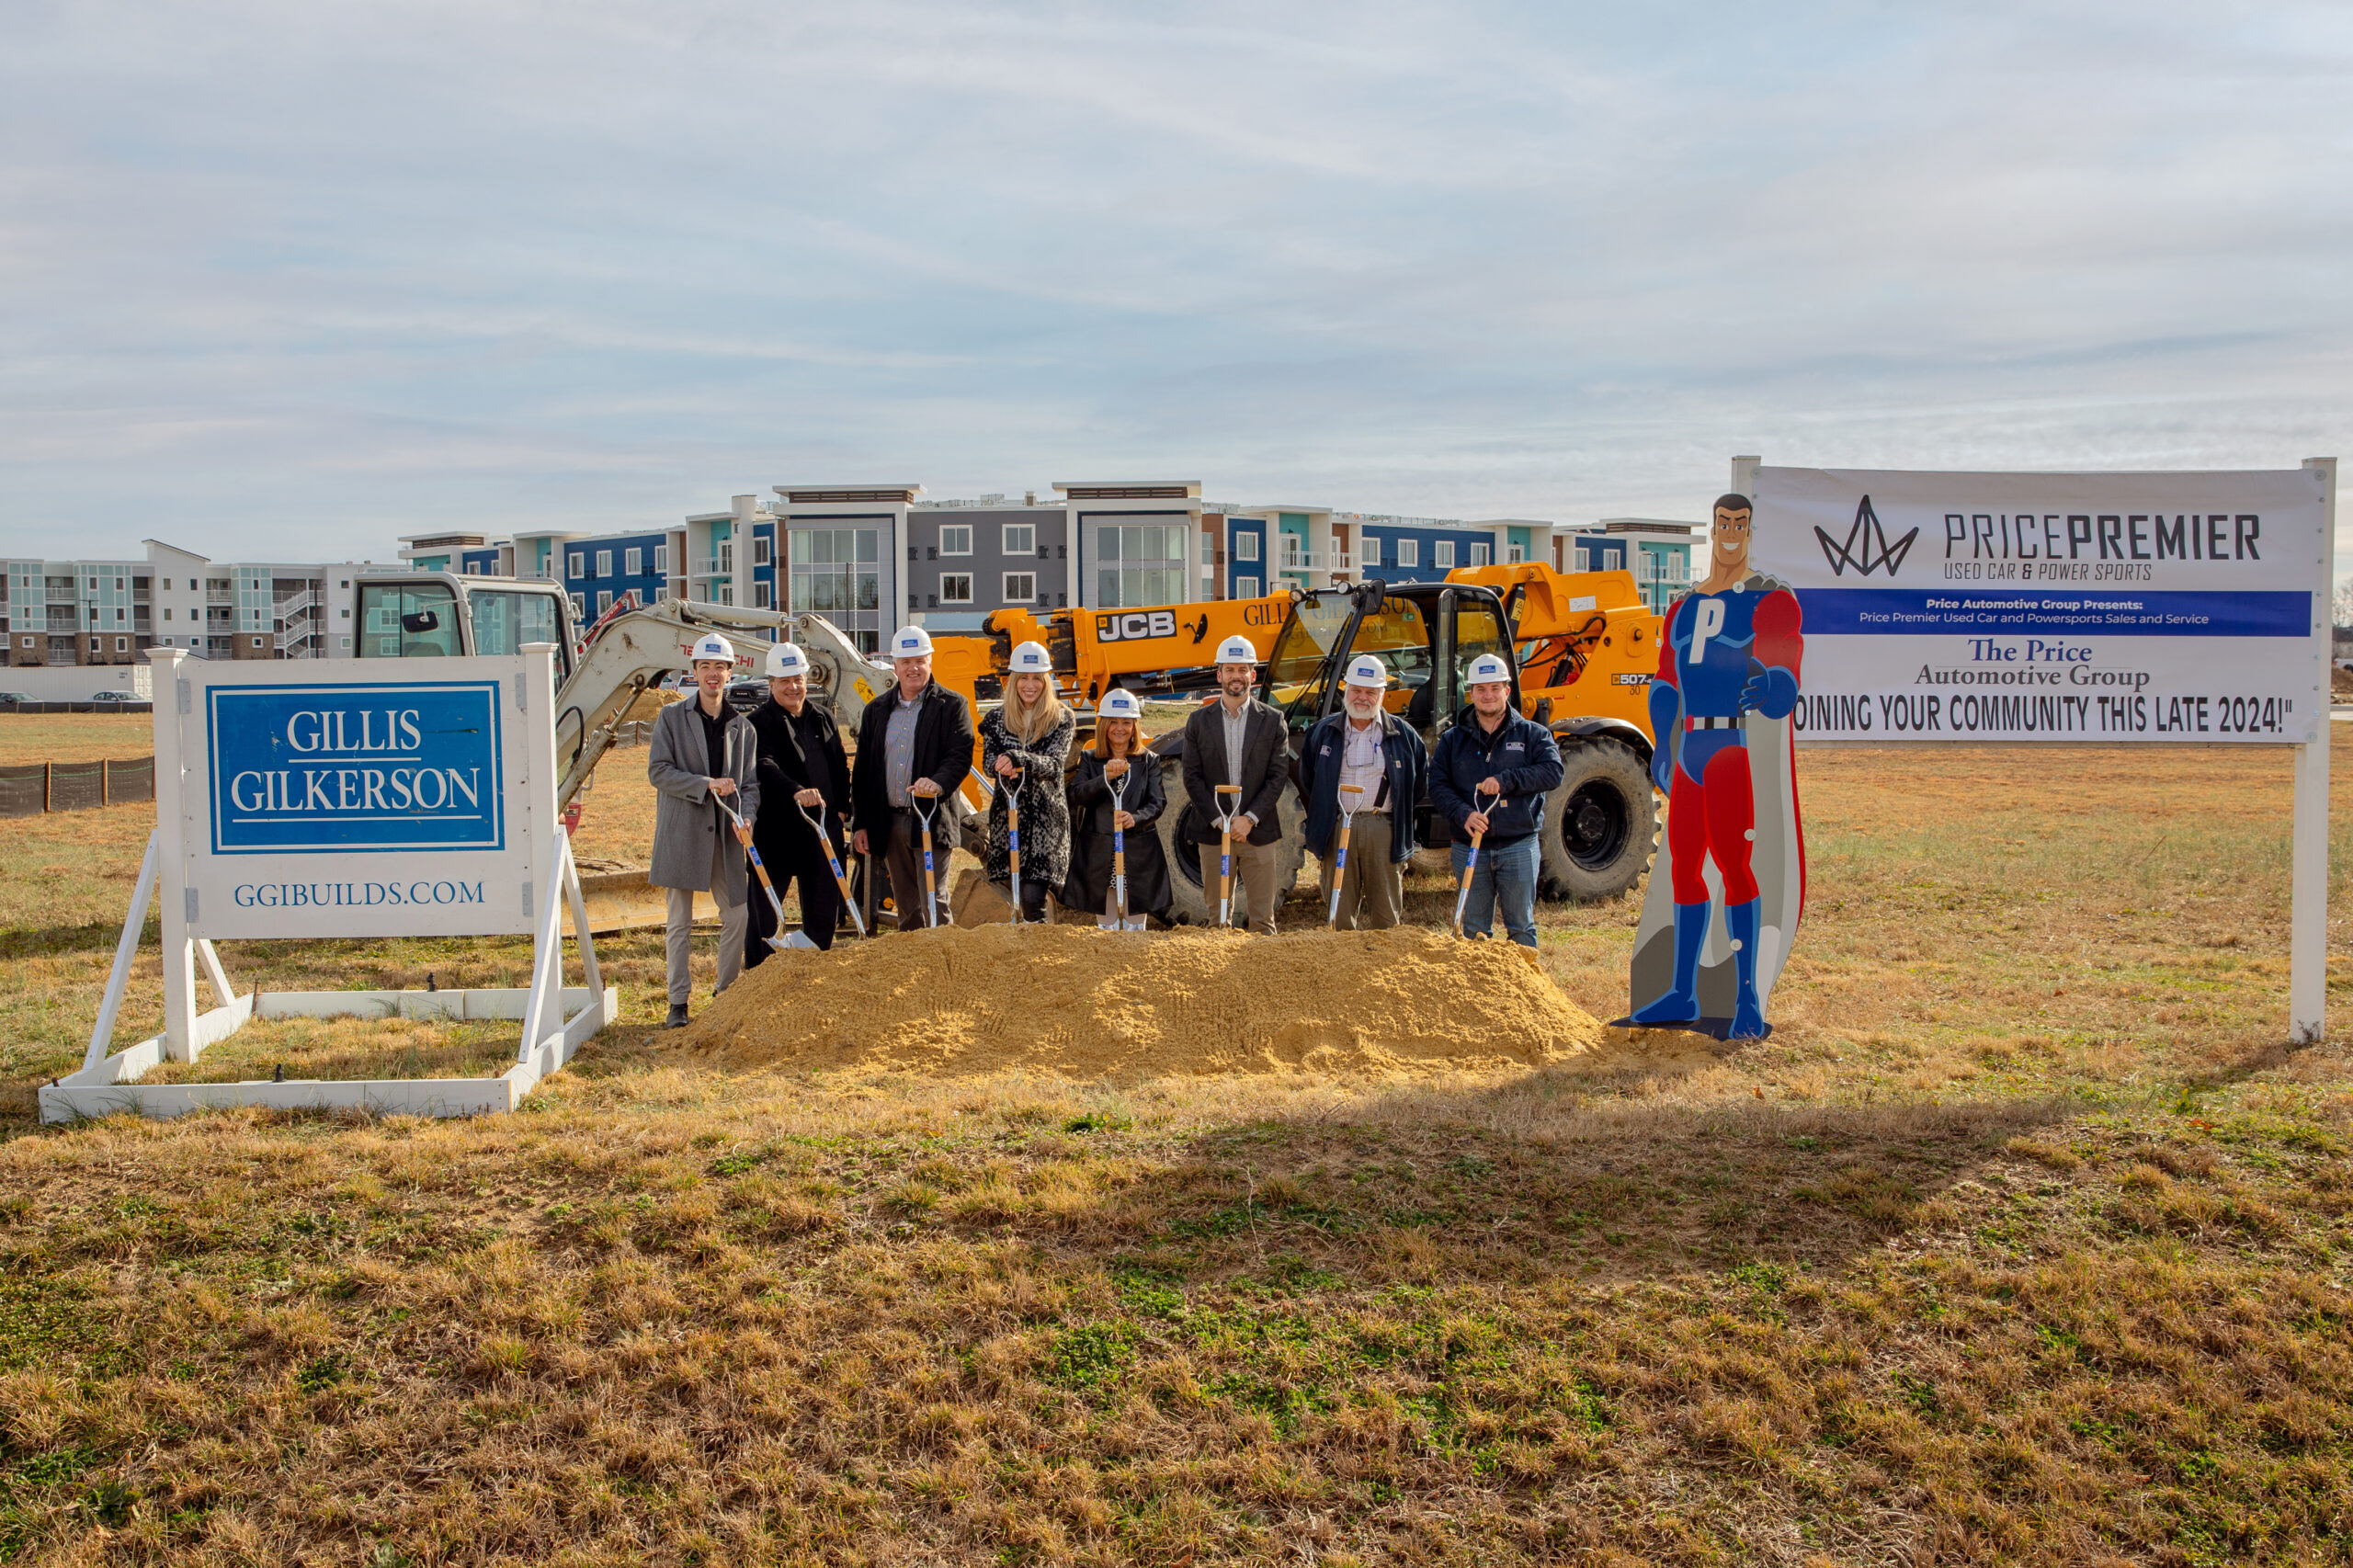 Price Automotive and Gillis Gilkerson Begin Construction of New Rehoboth Beach Dealership